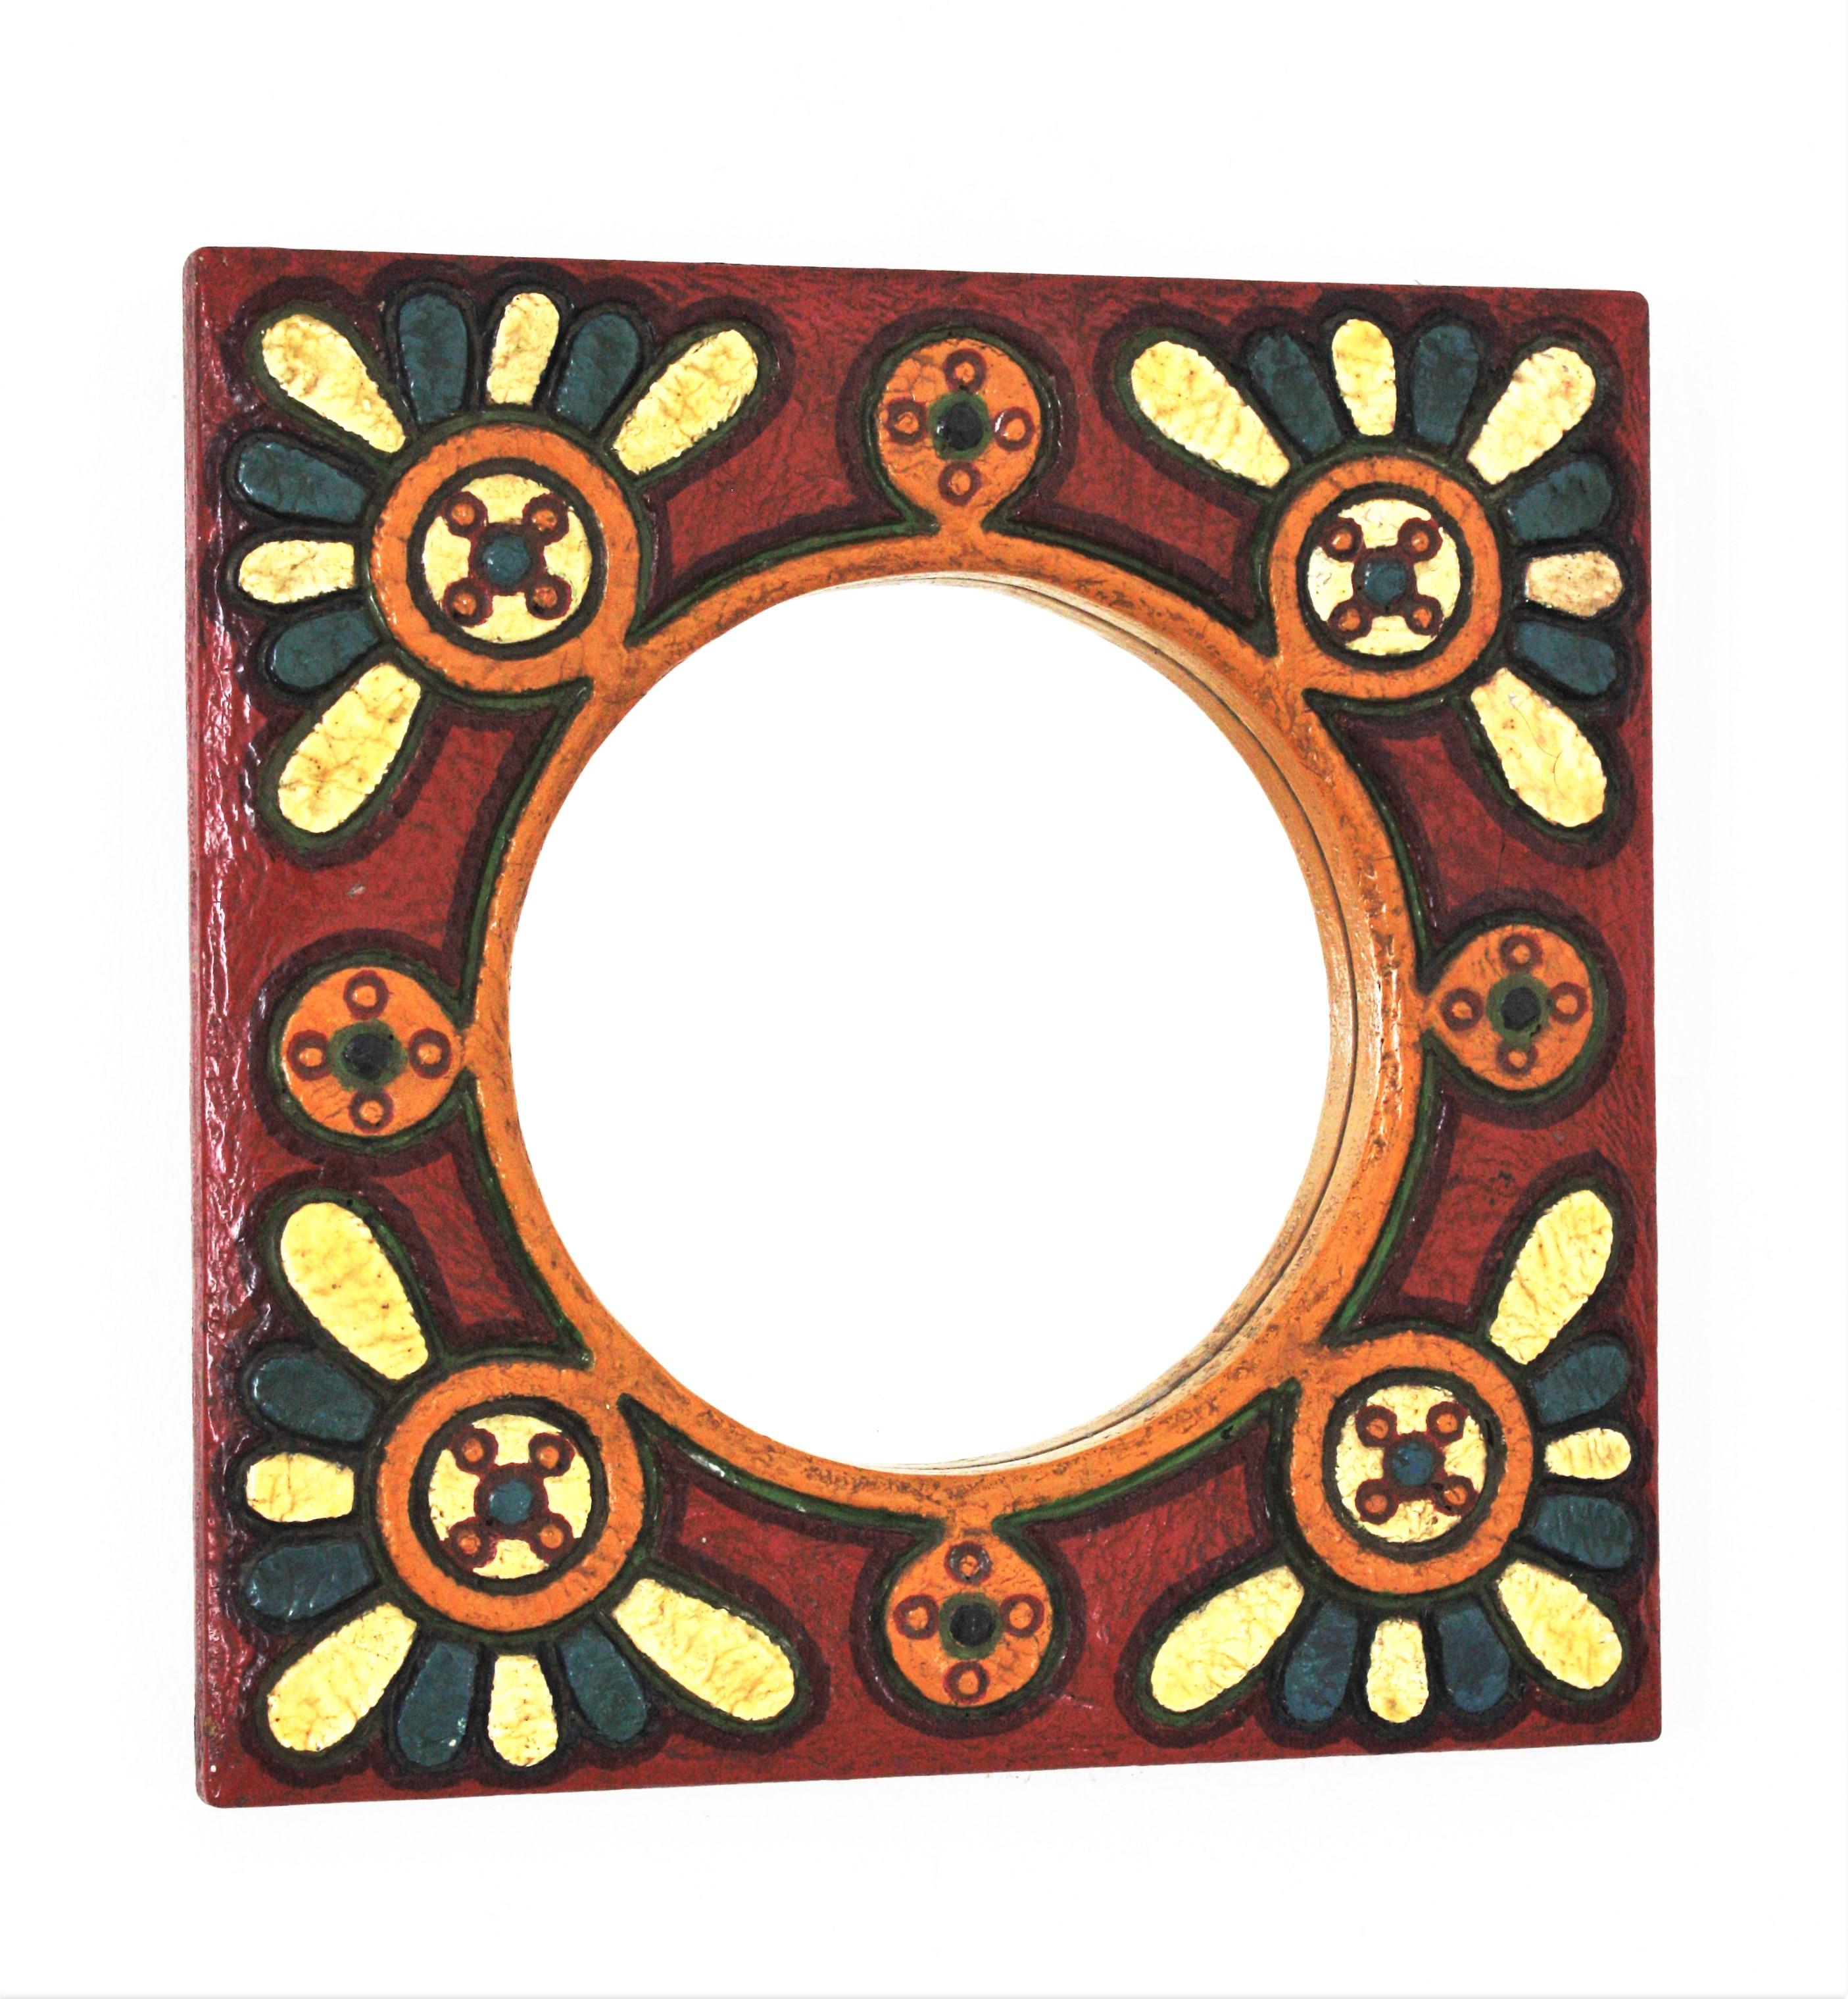 A cool hand-painted polychrome wood mirror with floral motifs . Spain, 1960s
This eyecatching wall mirror features an squared frame with flower power design surrounding the central round glass.
Colorful handpainted flowers adorning each corner on a